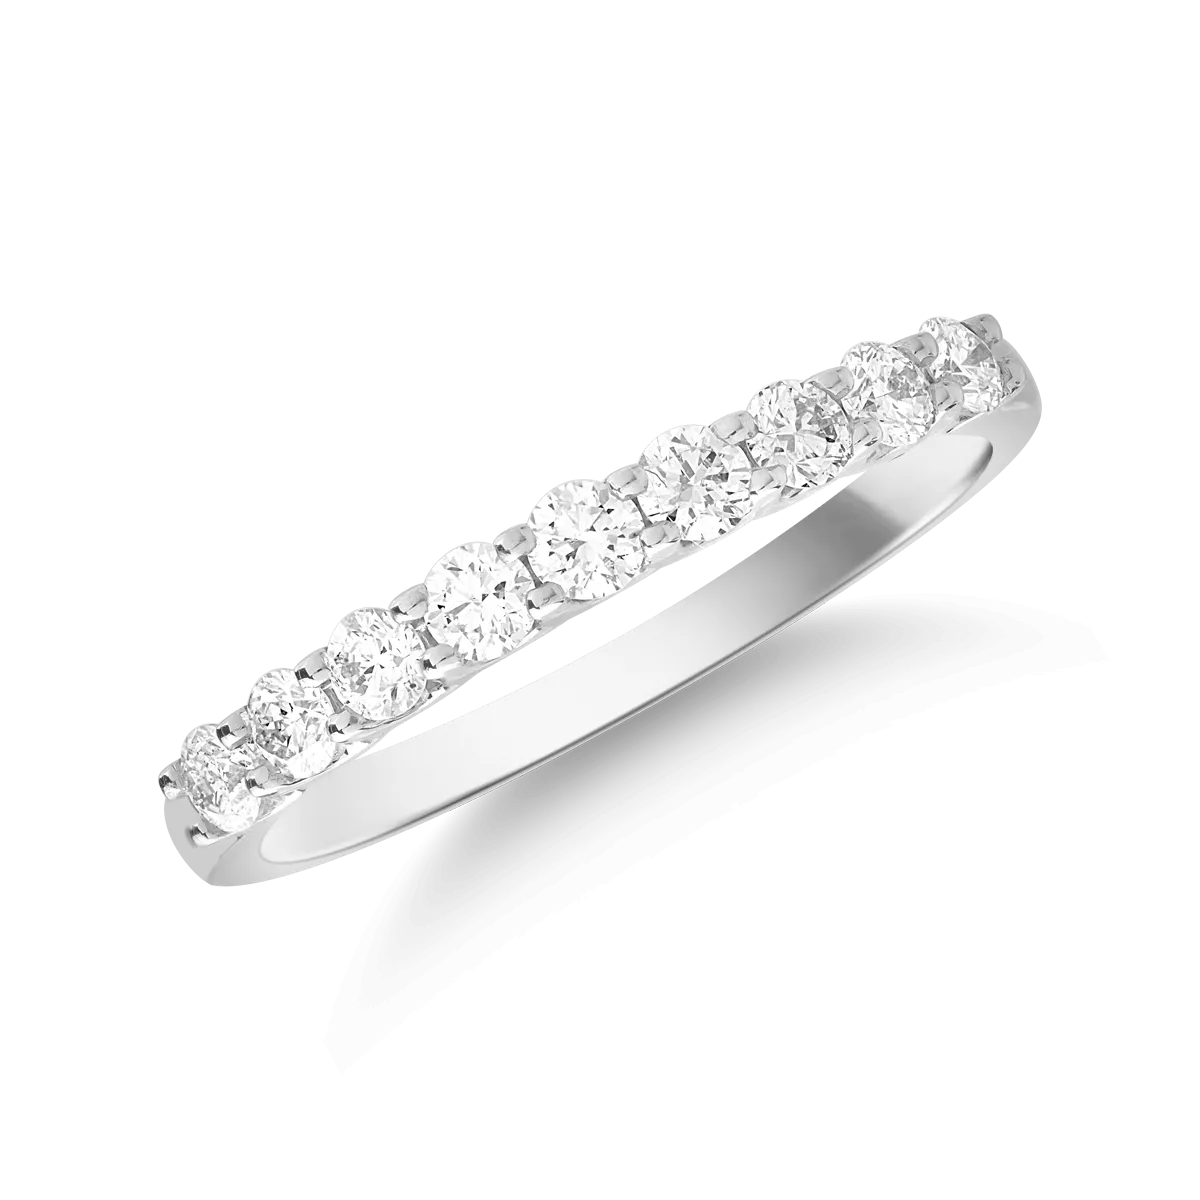 18K white gold ring with 0.5ct diamonds